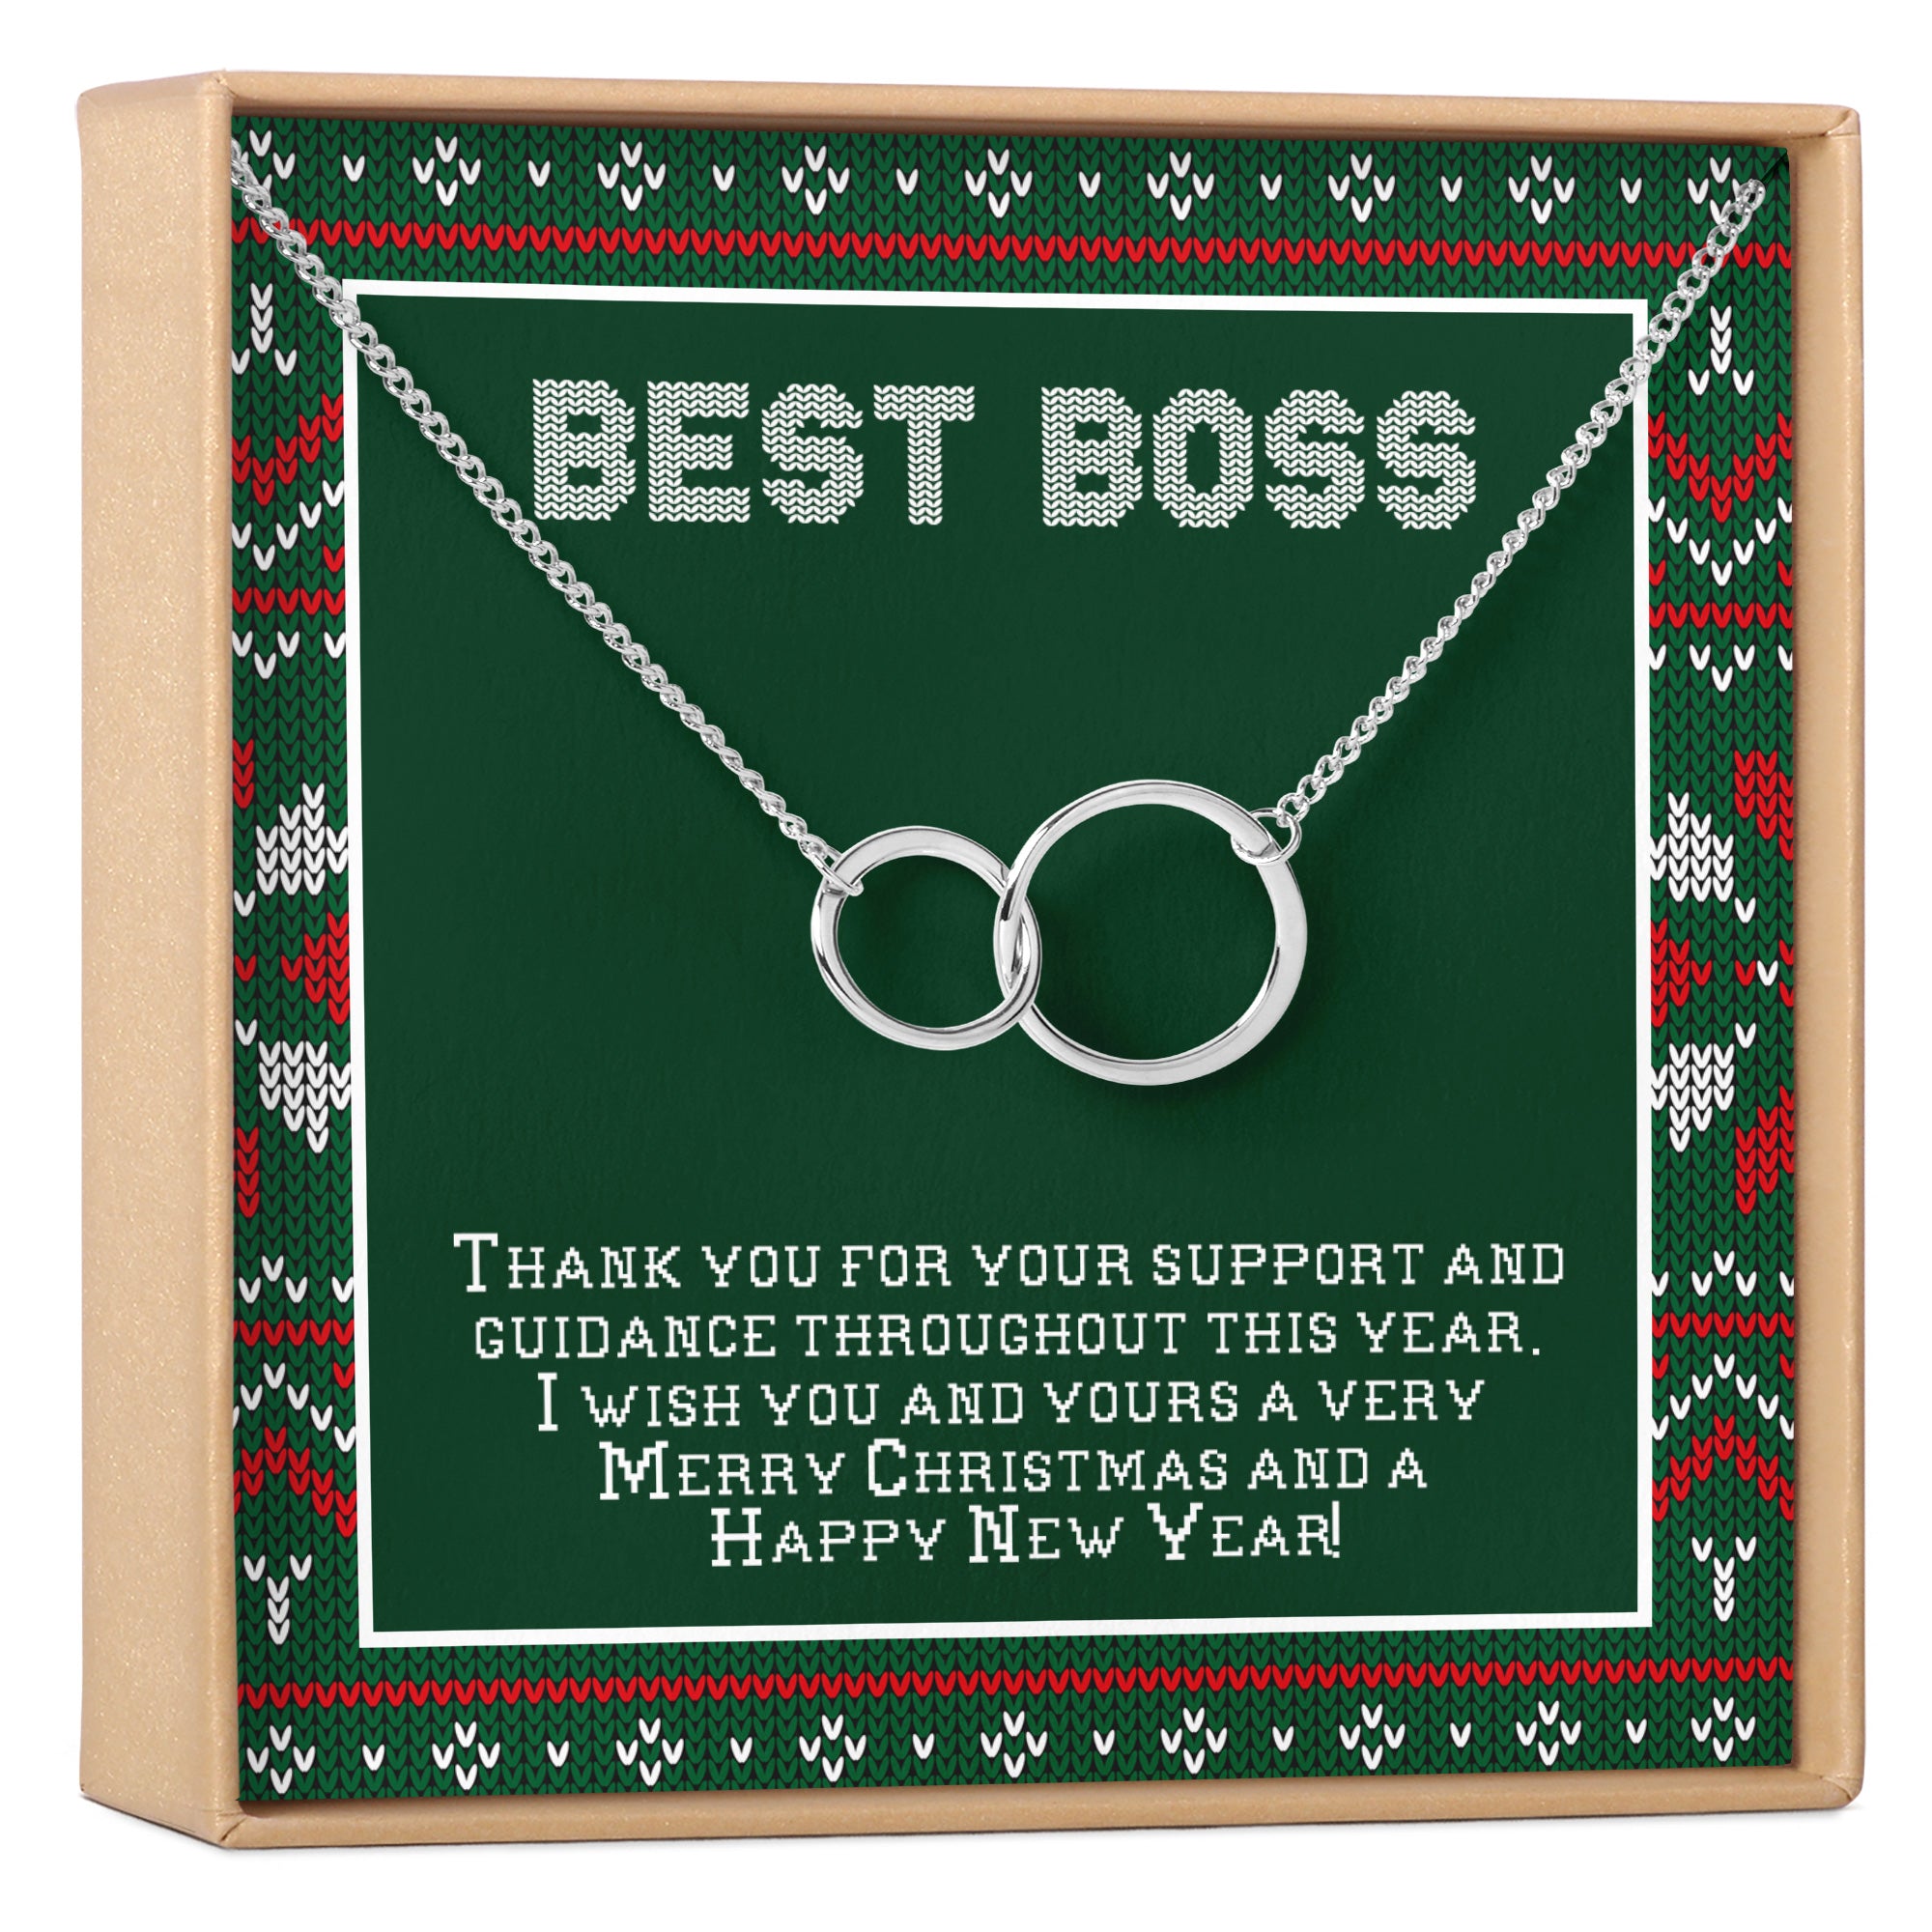 Creative Christmas Gift Ideas for Managers